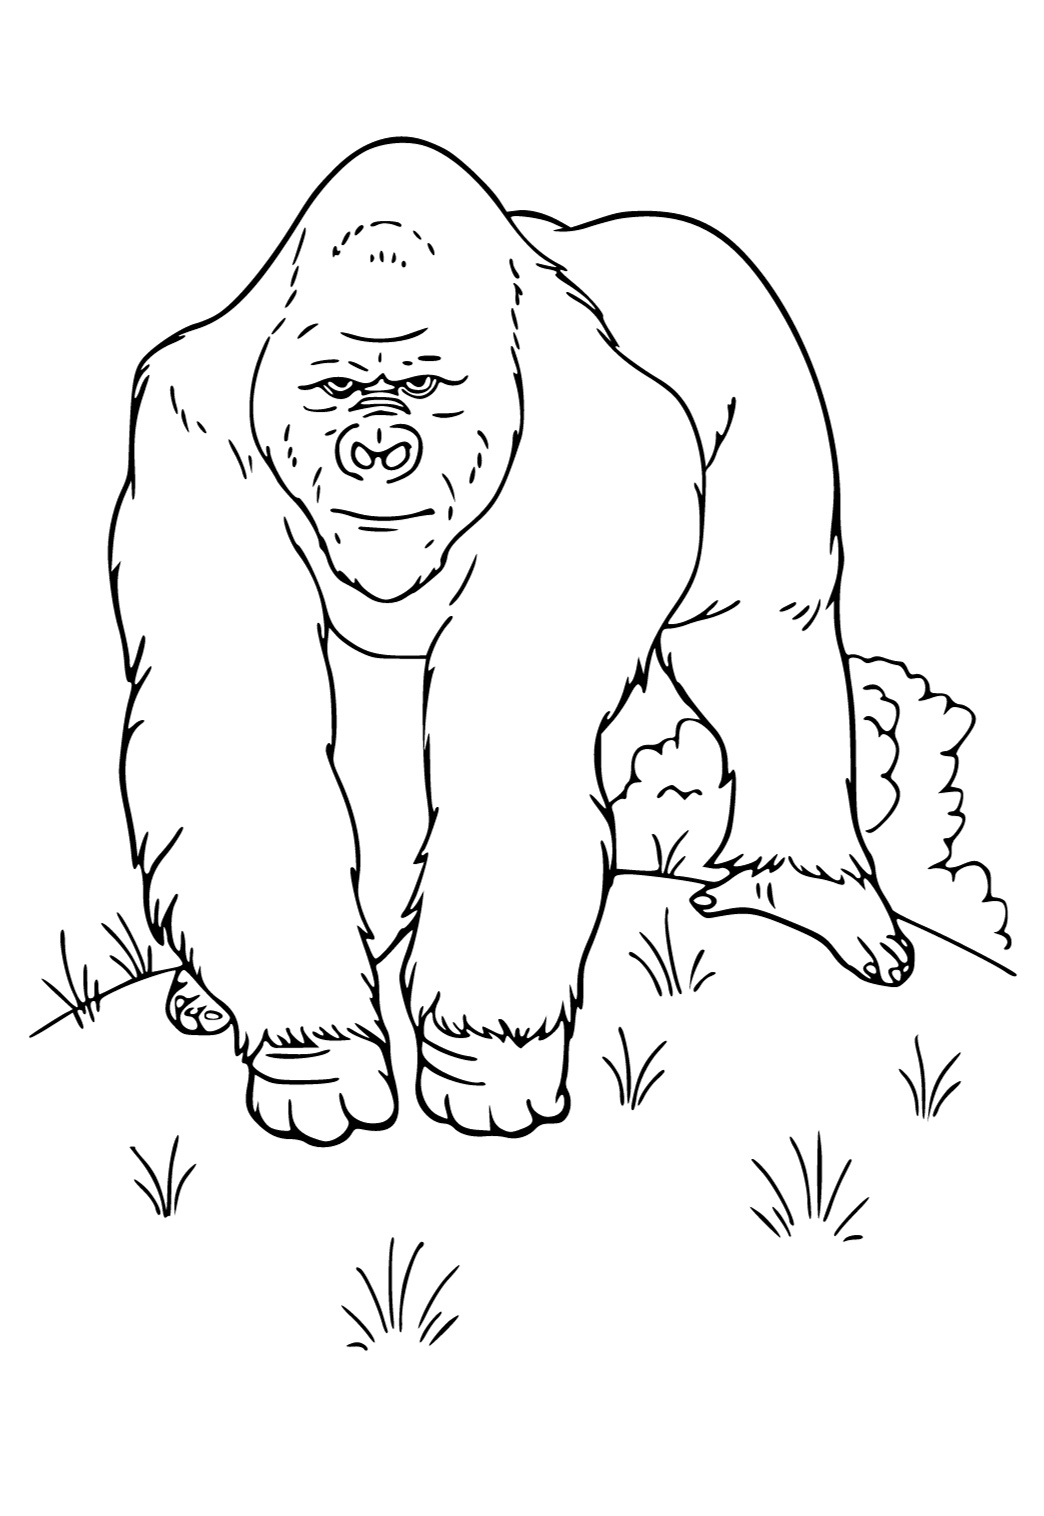 Free printable gorilla nature coloring page for adults and kids